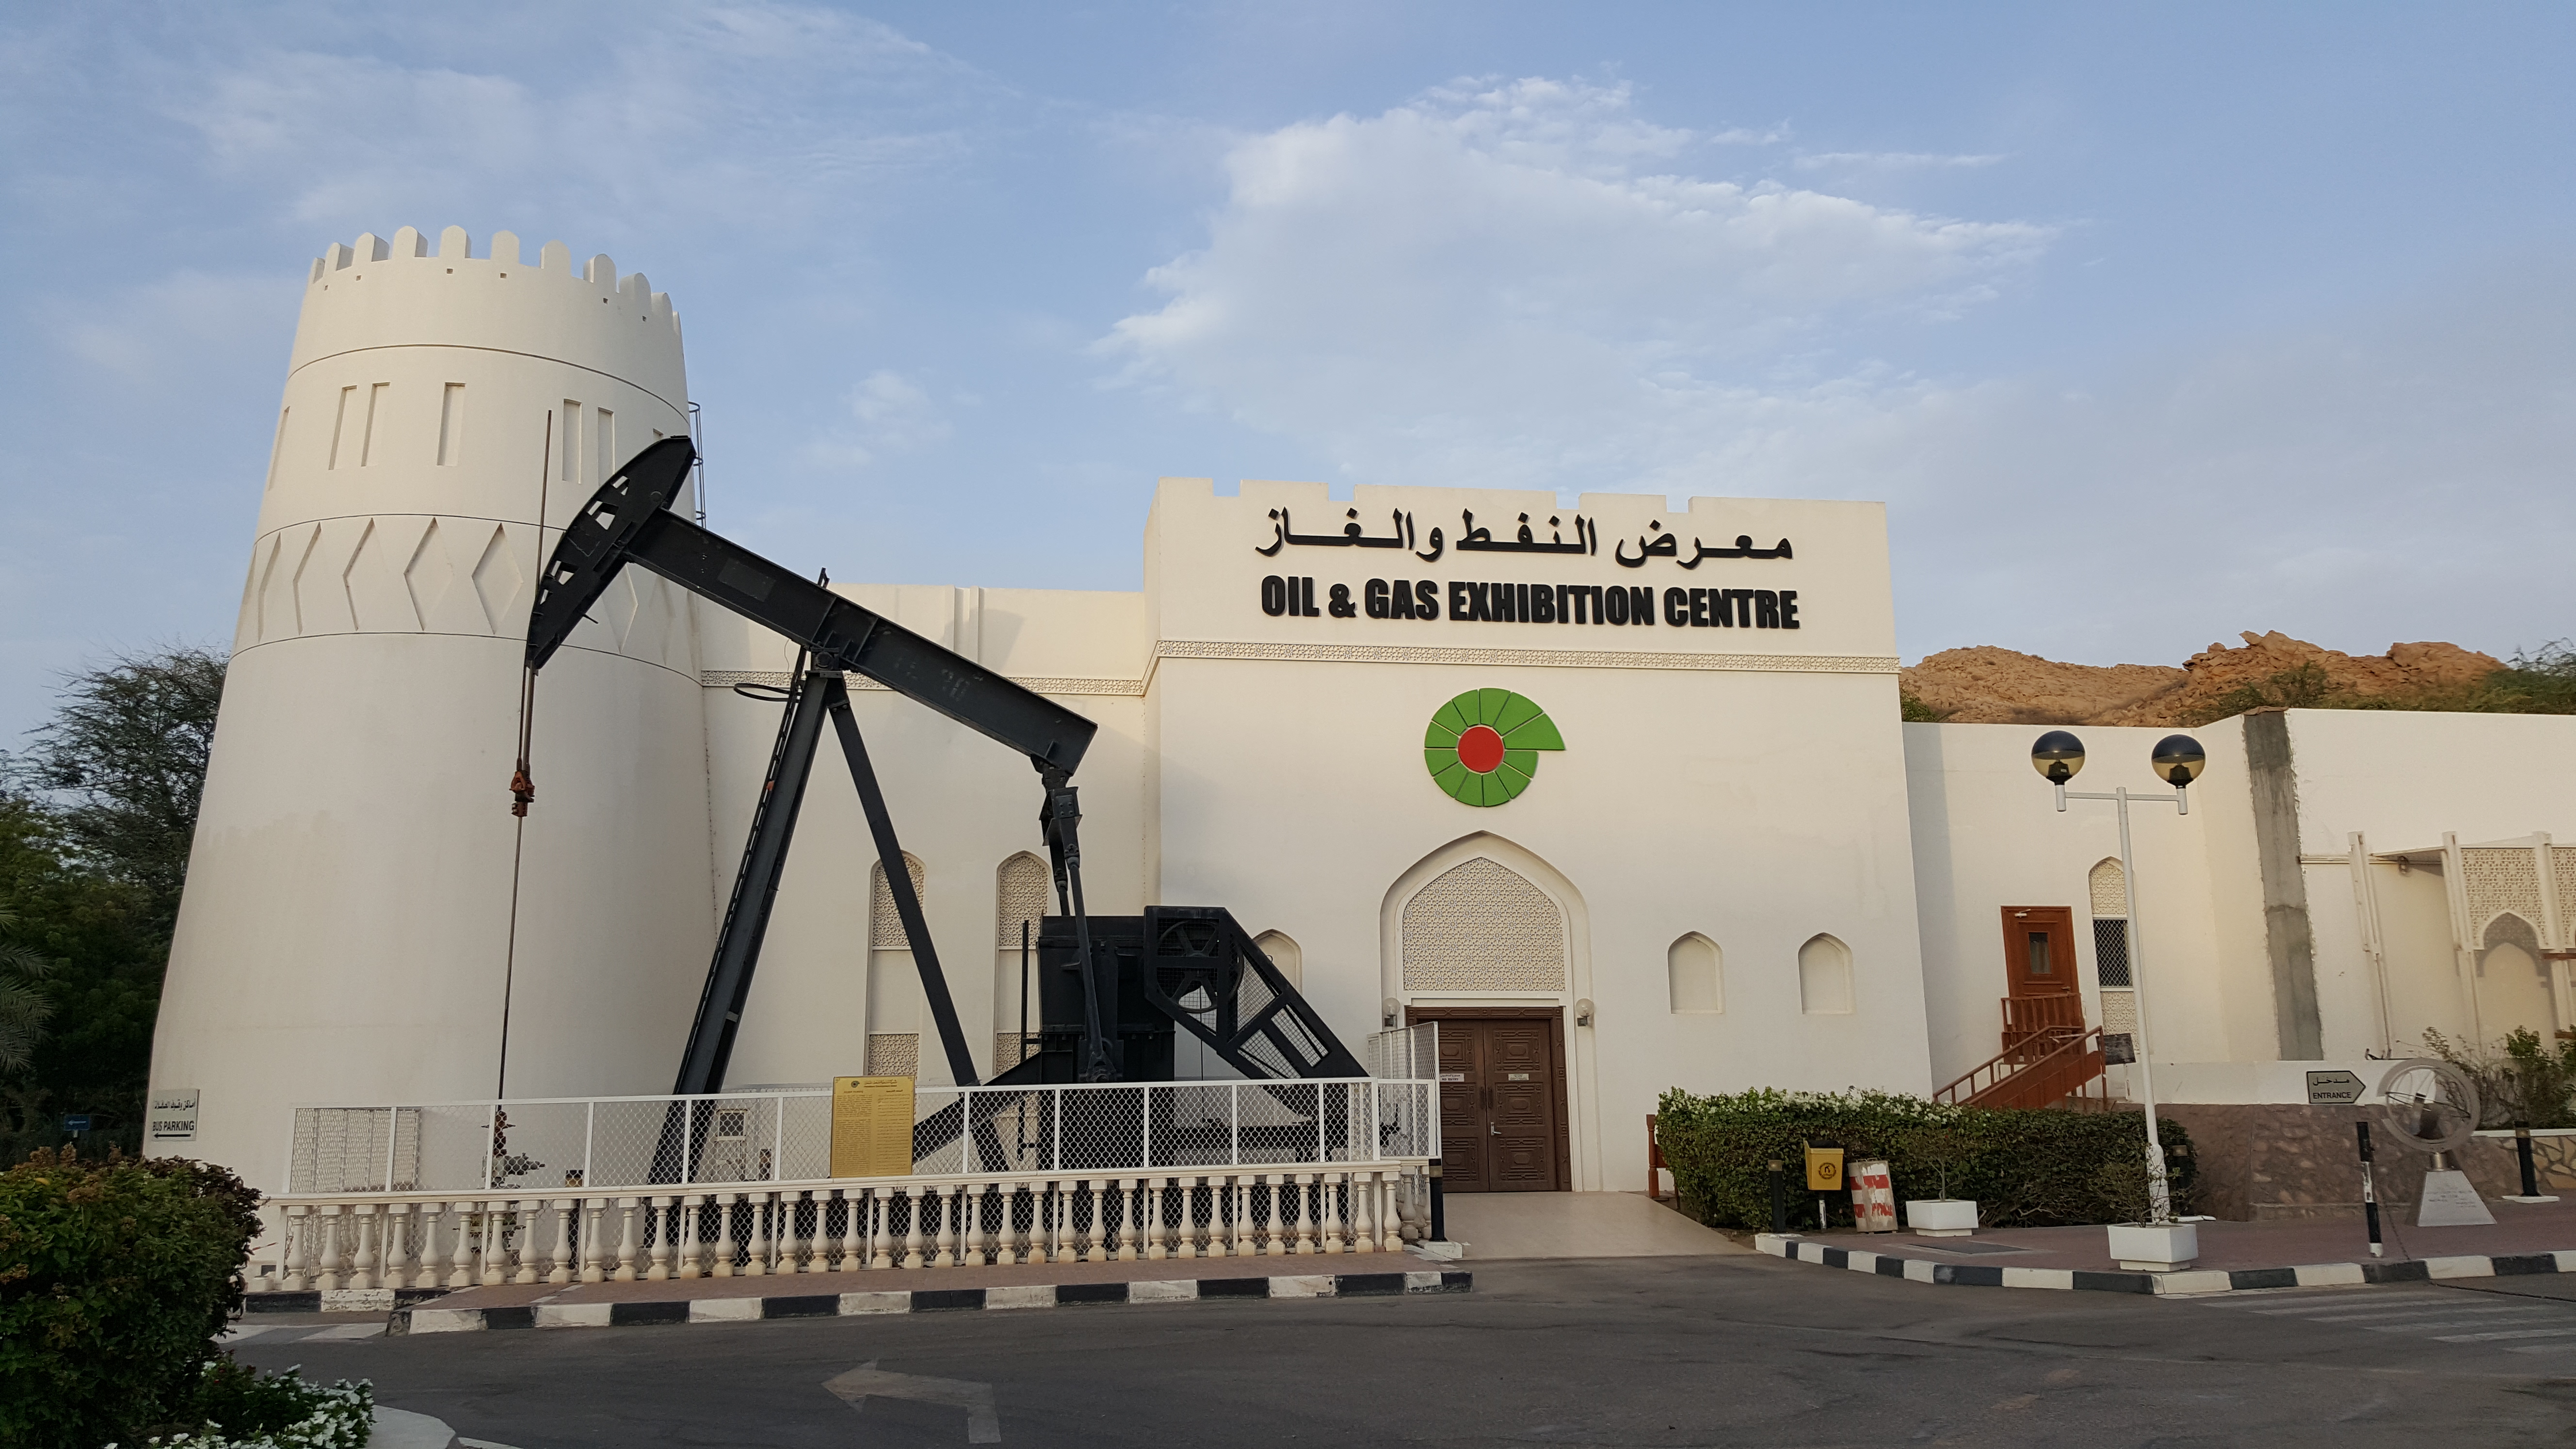 PDO Oil & Gas Exhibition | Muscat, Oman Attractions - Lonely Planet